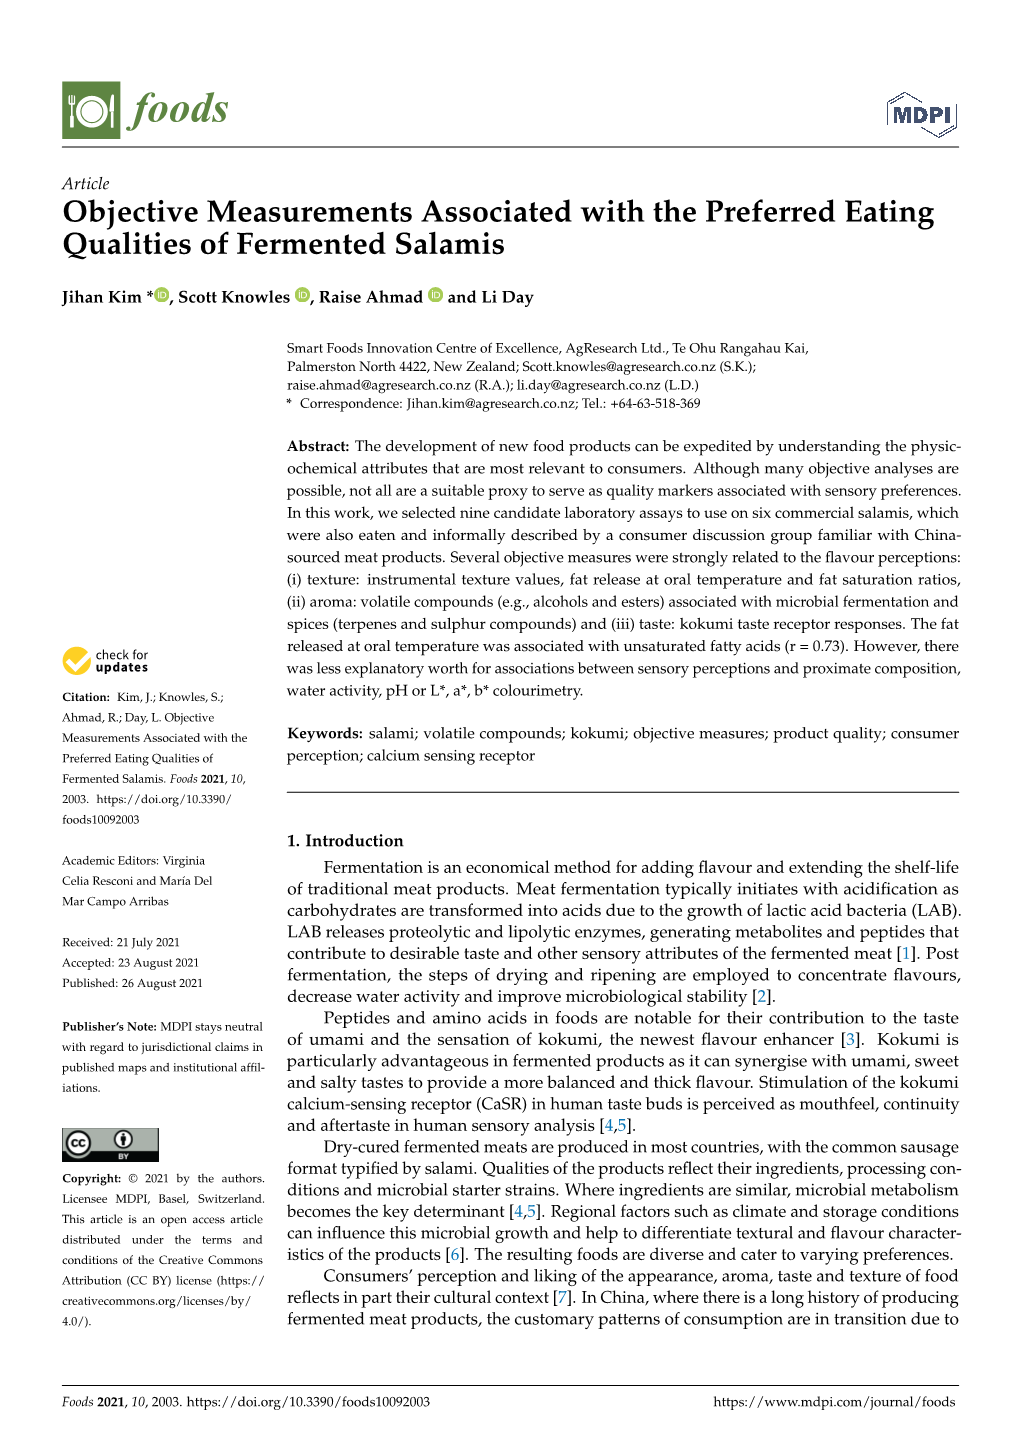 Objective Measurements Associated with the Preferred Eating Qualities of Fermented Salamis